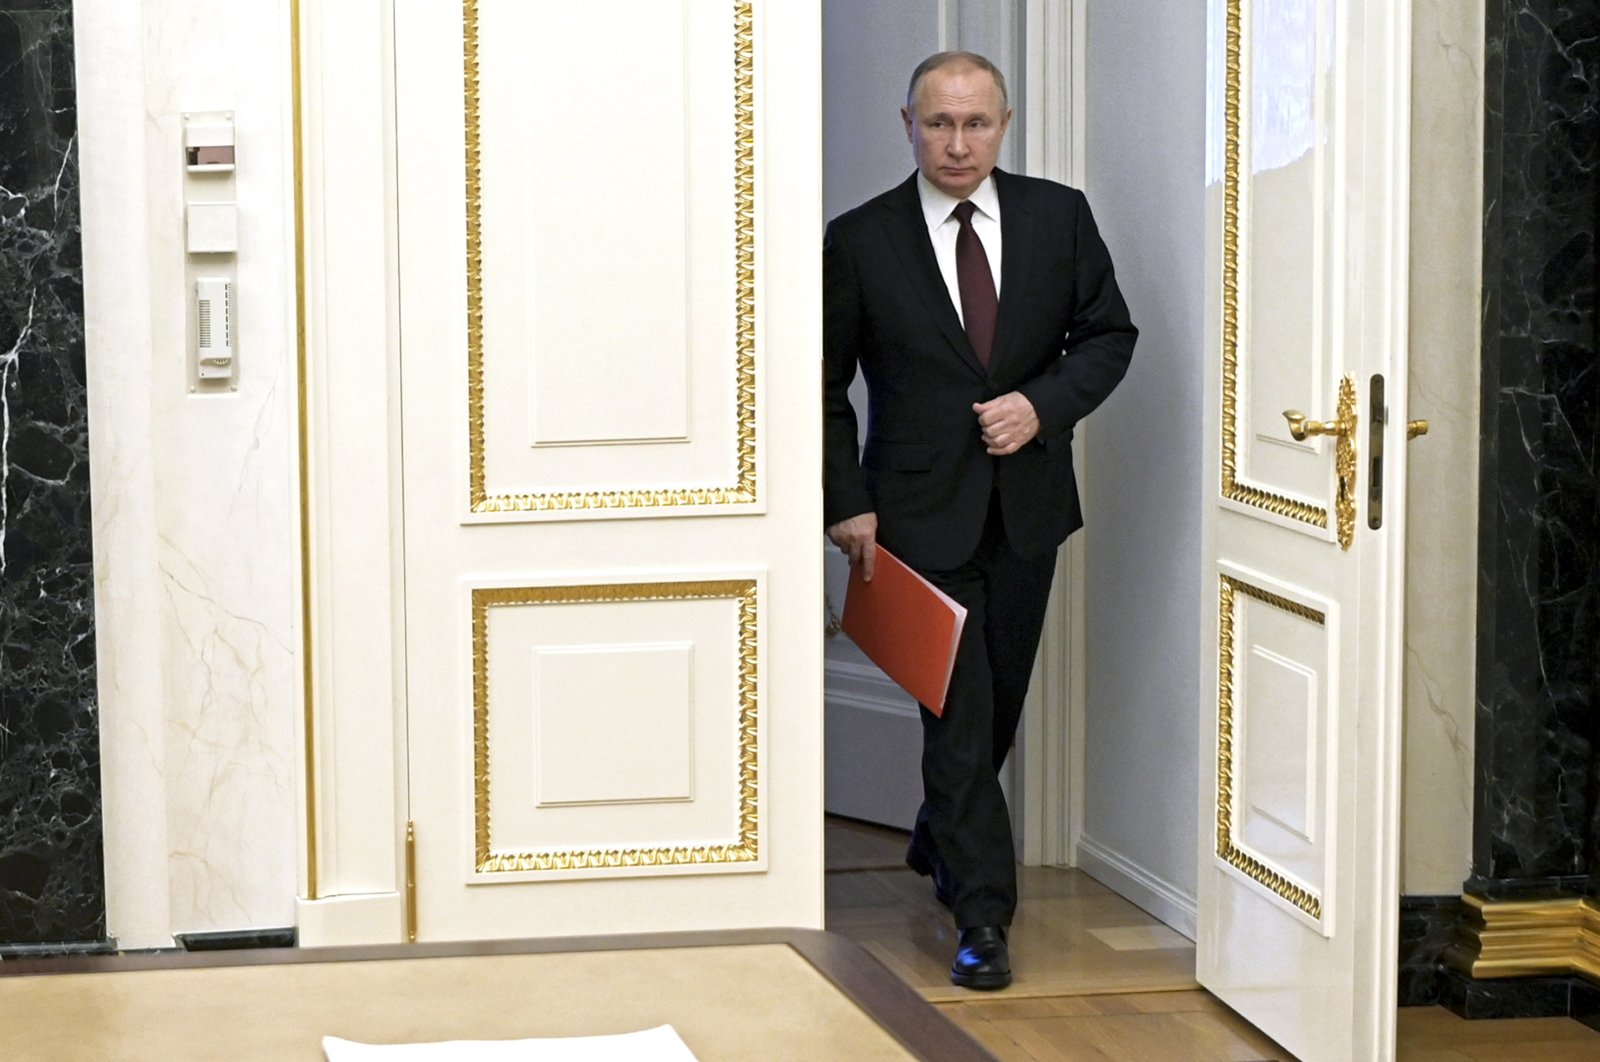 Russian President Vladimir Putin enters a hall to chair a Security Council meeting in Moscow, Russia, Friday, Feb. 25, 2022. (AP Photo)